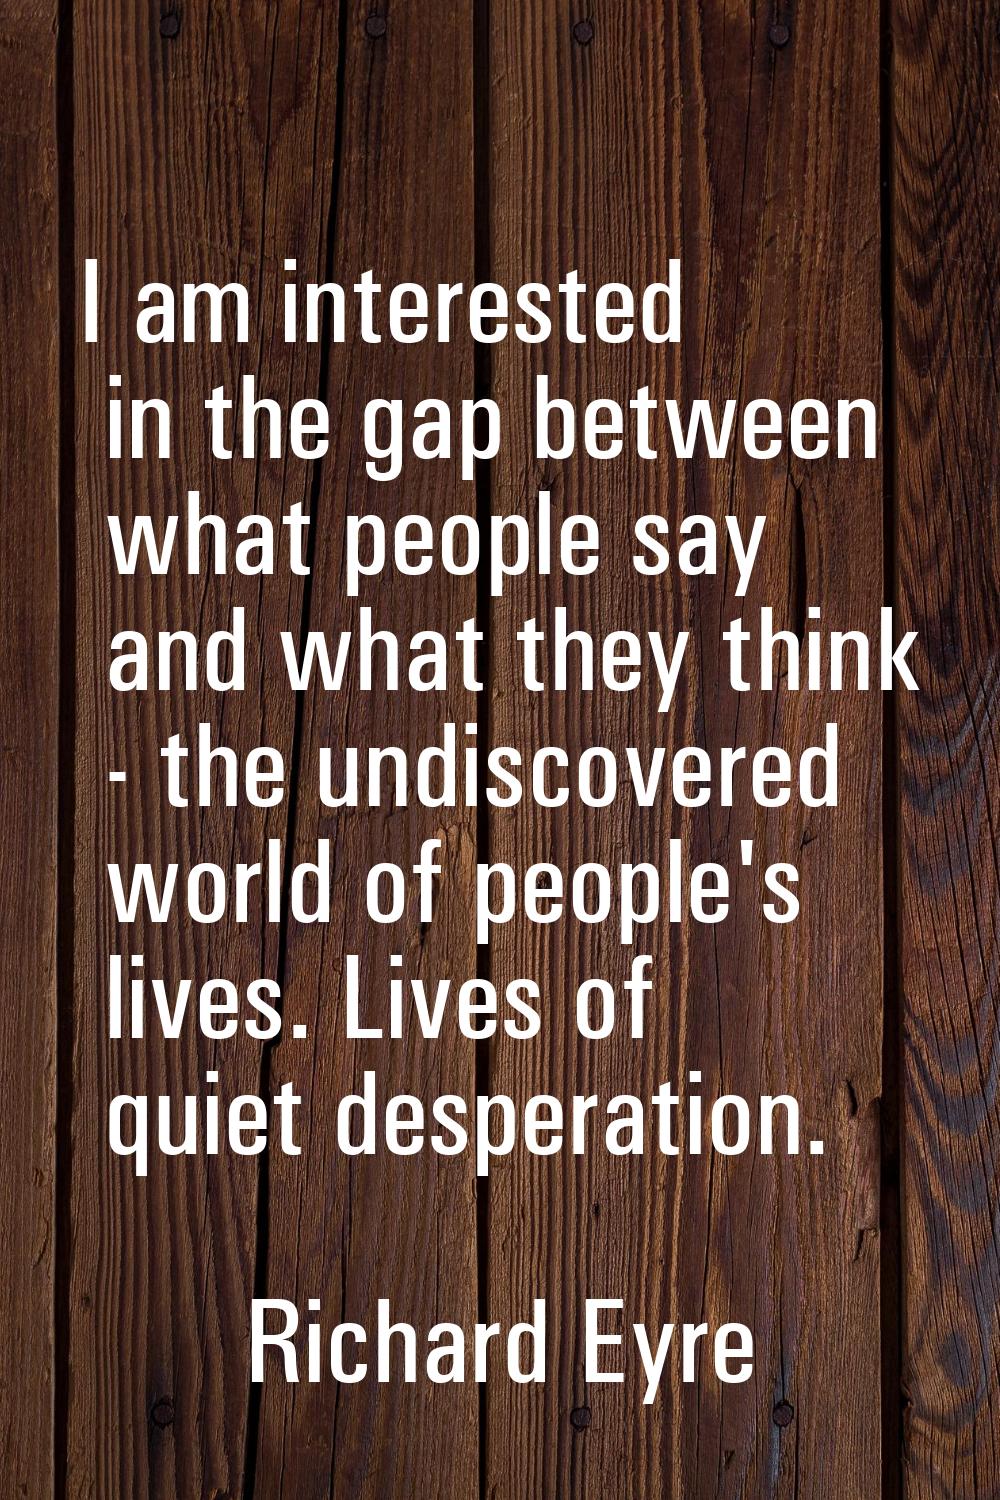 I am interested in the gap between what people say and what they think - the undiscovered world of 